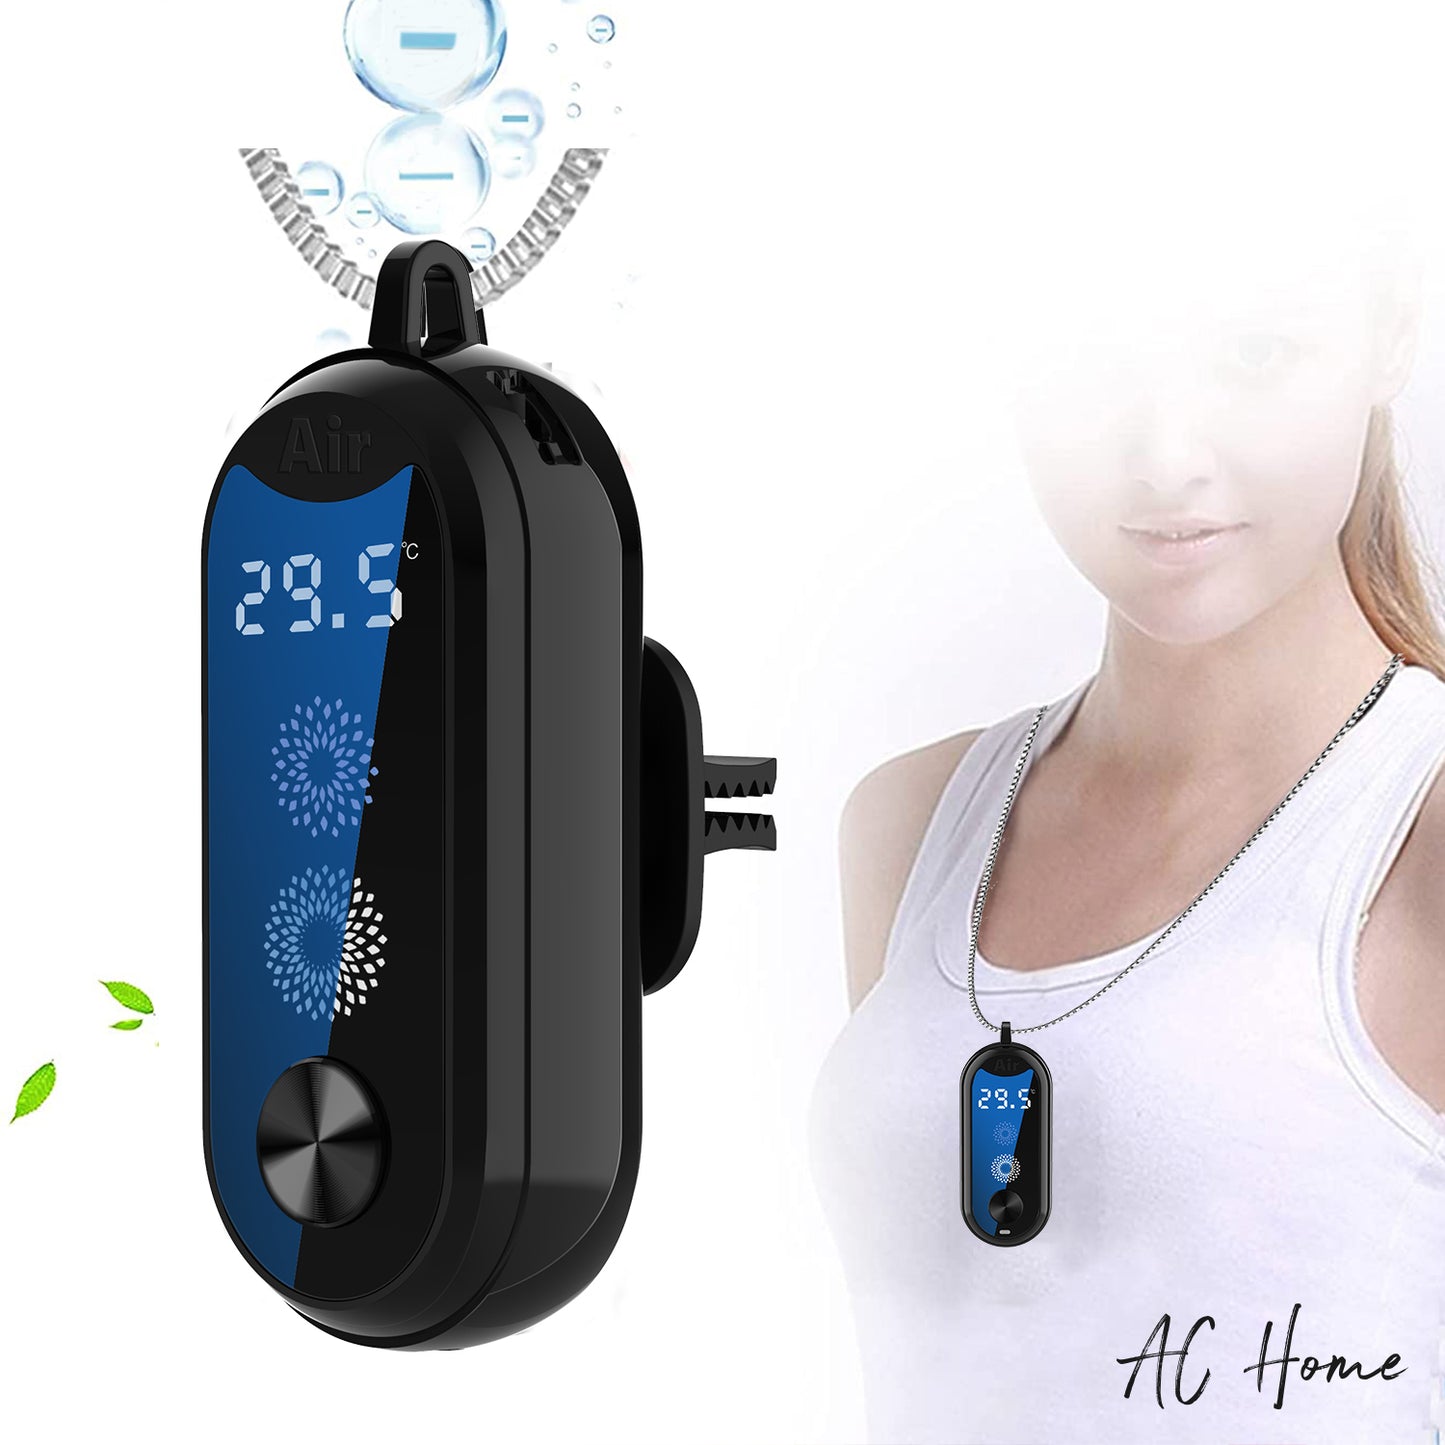 Portable Adjustable Negative Ion Neck Travel Air Cleaner Anion Wearable Ionizer Portable Personal Mini Necklace  Air Purifier -Perfect for Your Health